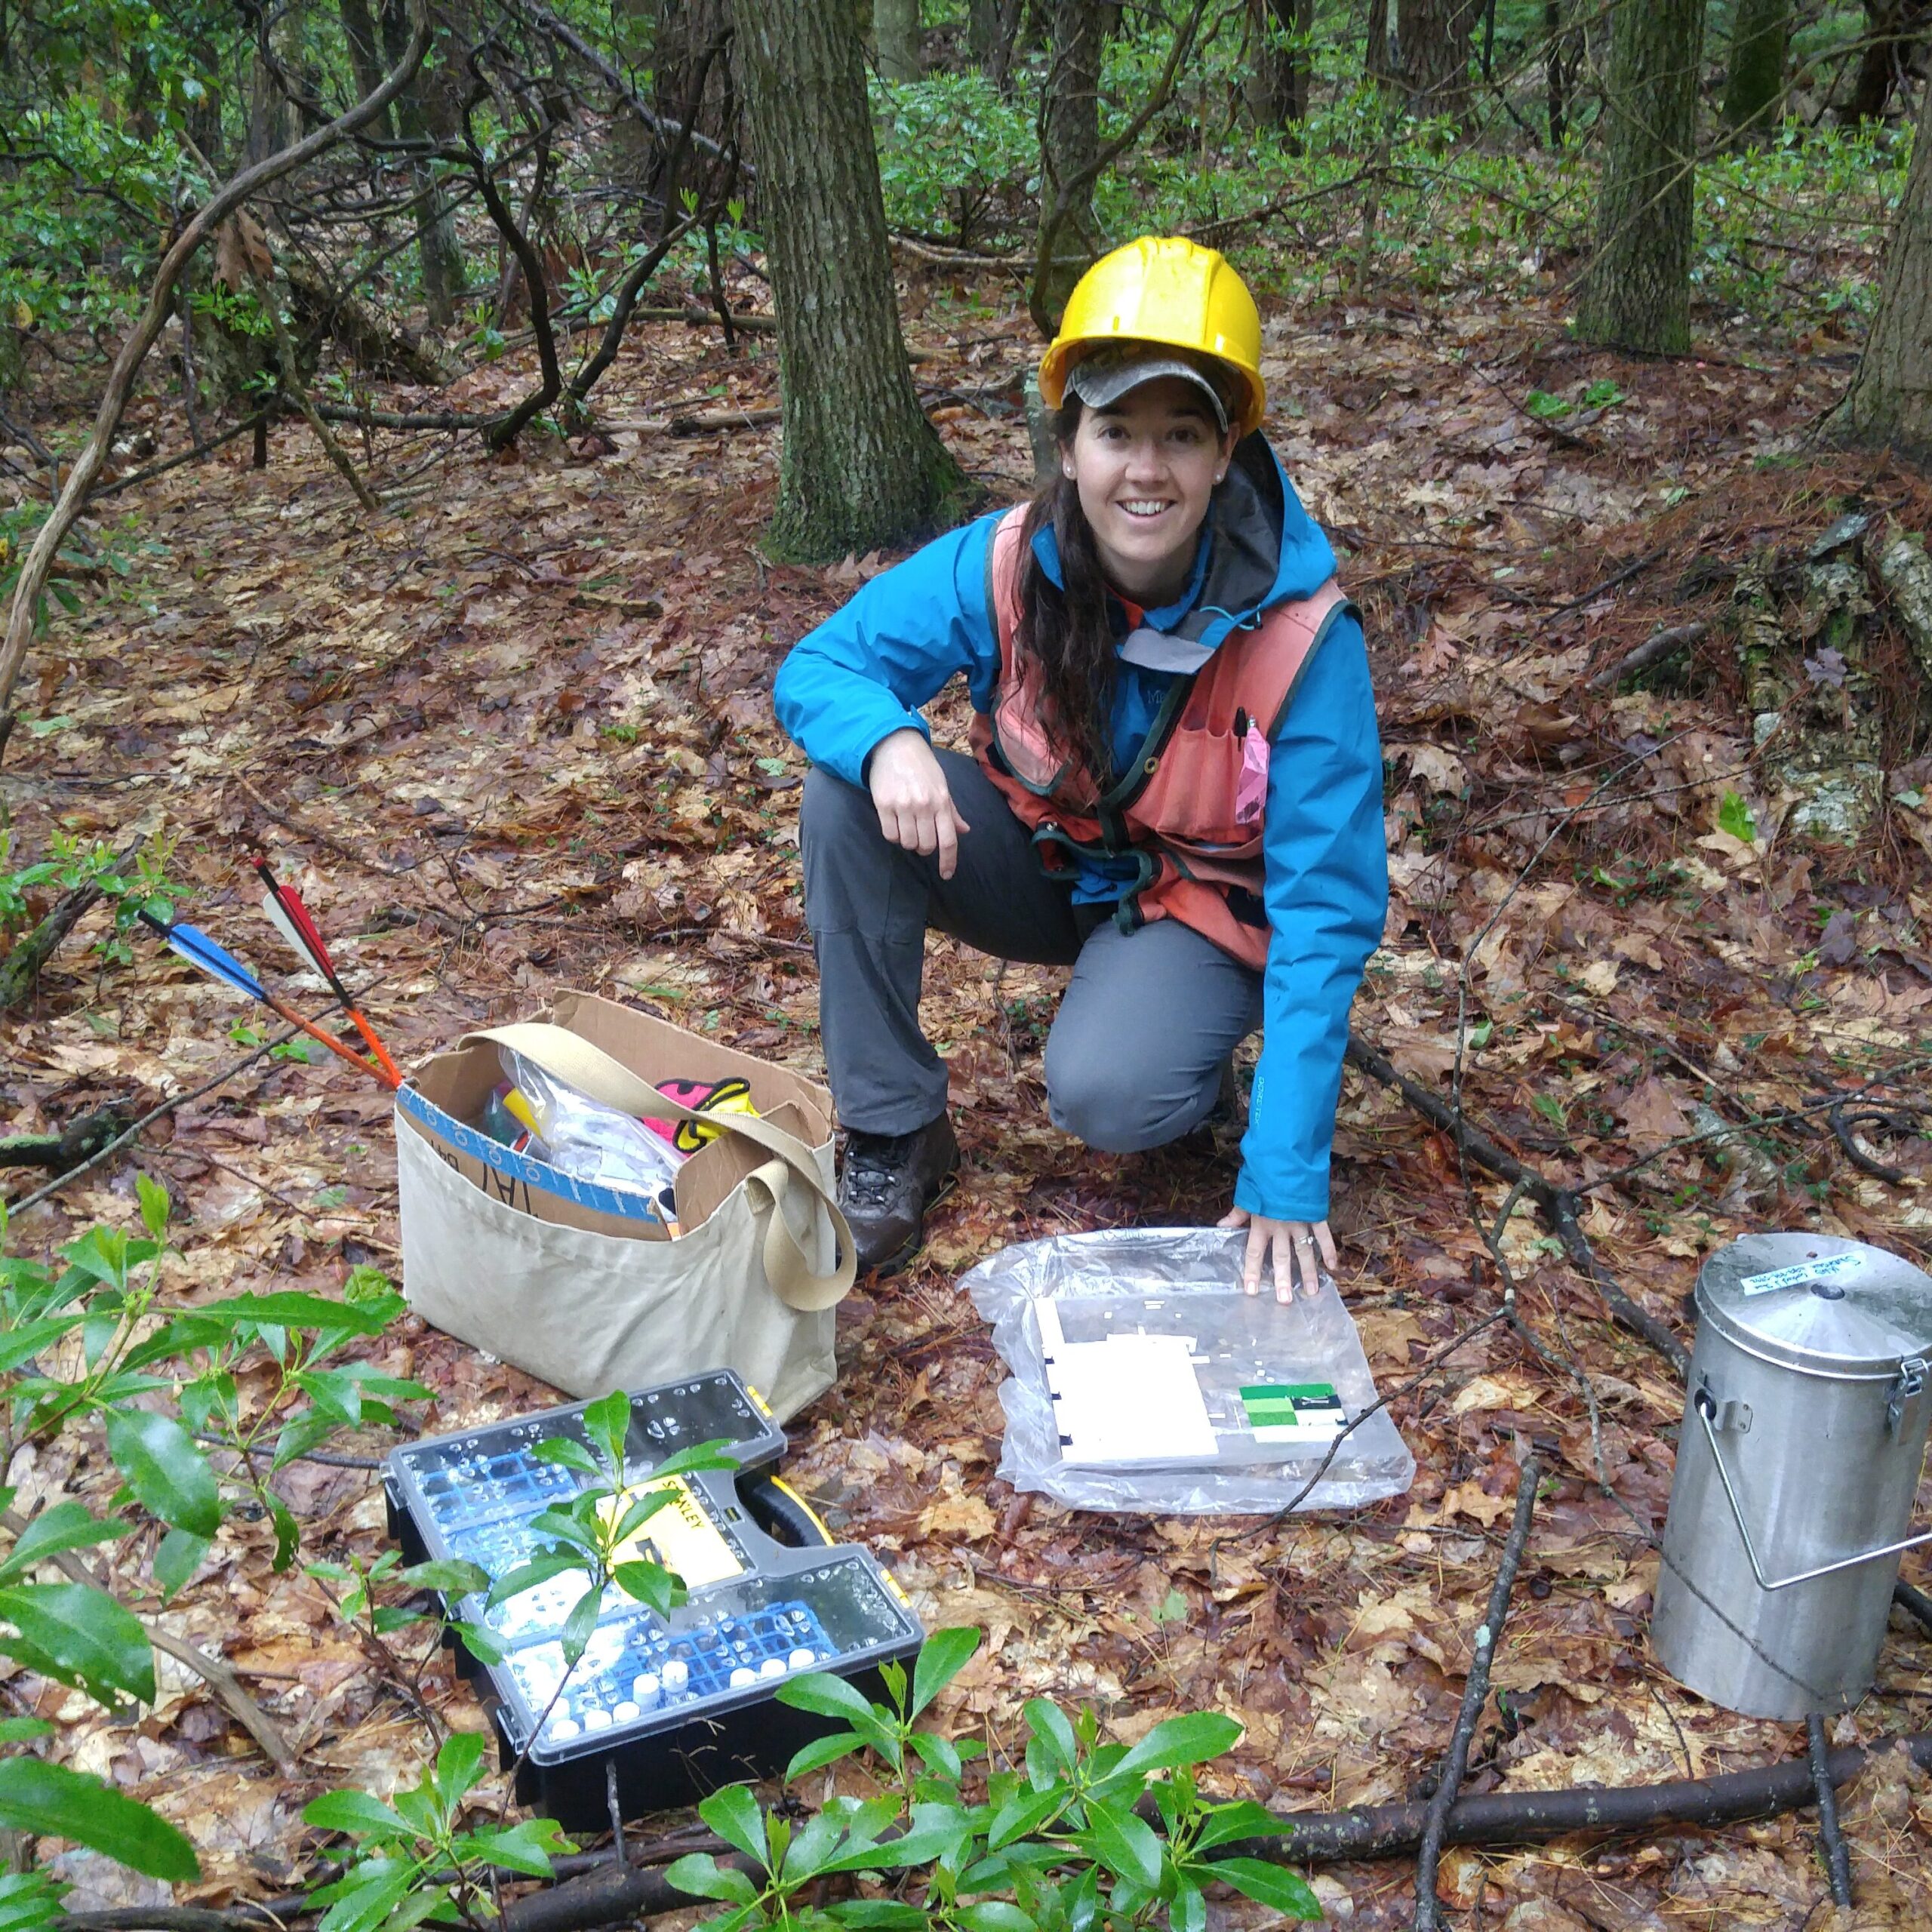 Jess Shue kneels on a forest floor wearing a yellow hard hat, with a silver canister, bag of crossbow bolts and scientific collecting cases in front of her